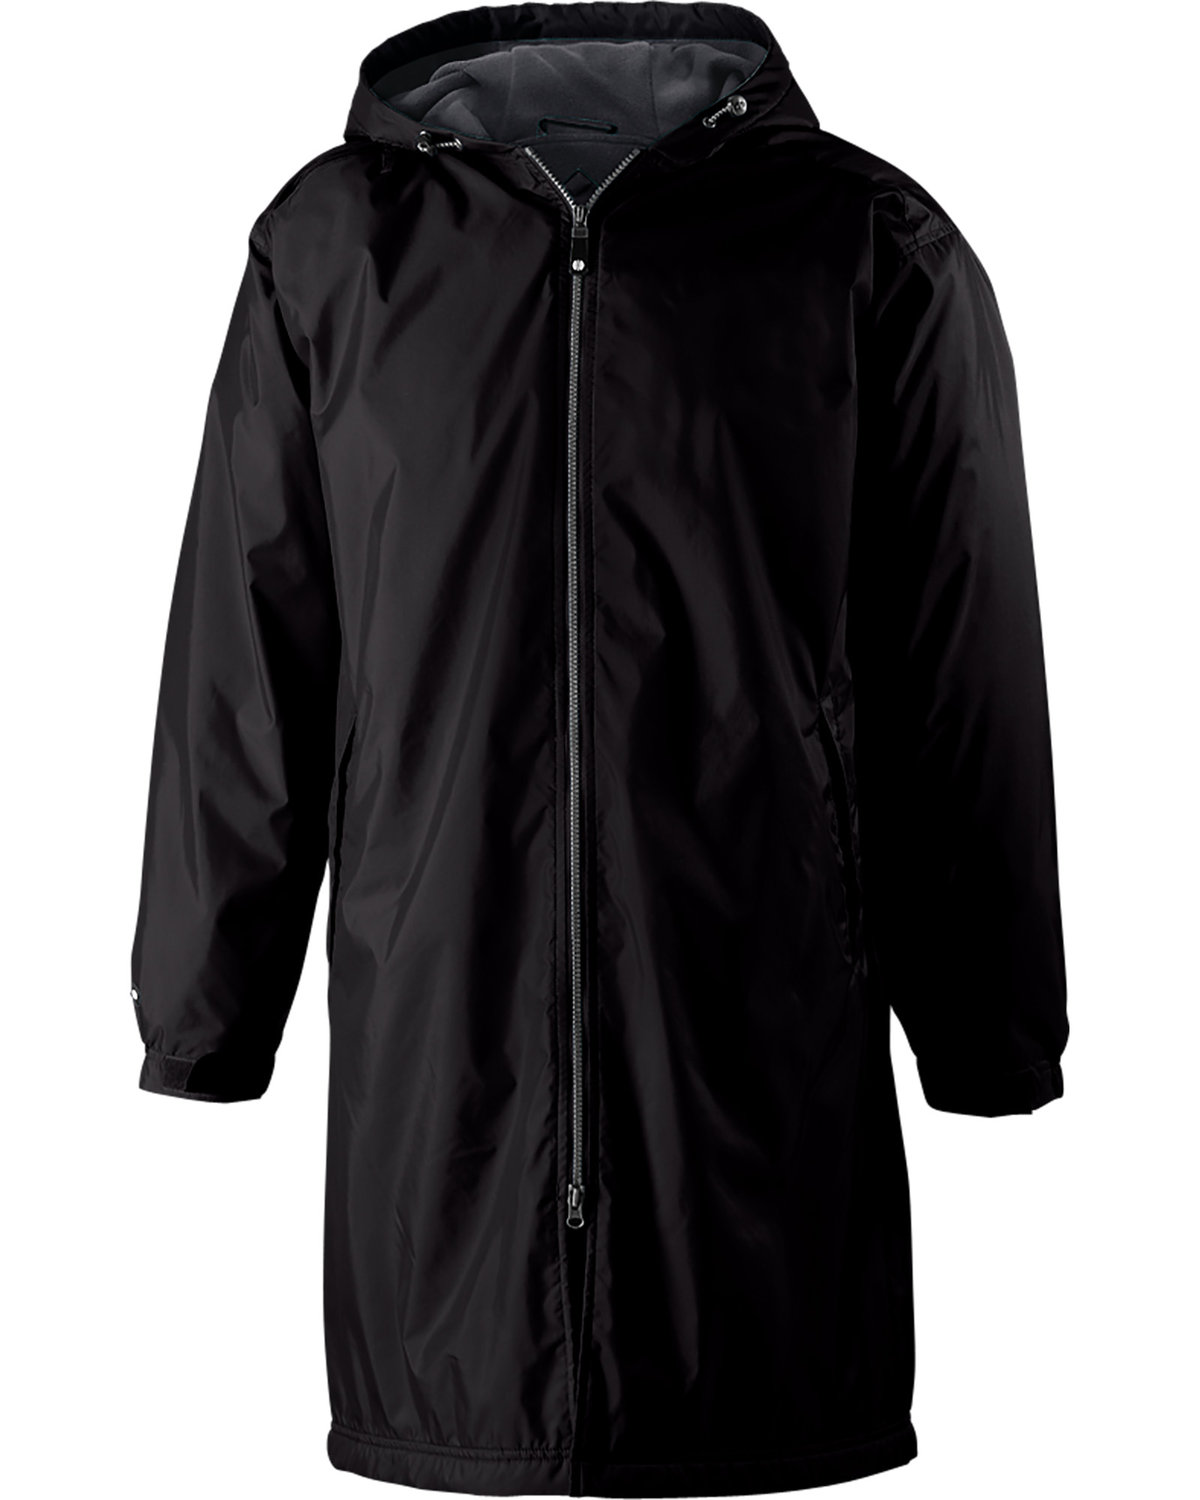 Holloway Adult Polyester Full Zip Conquest Jacket | alphabroder